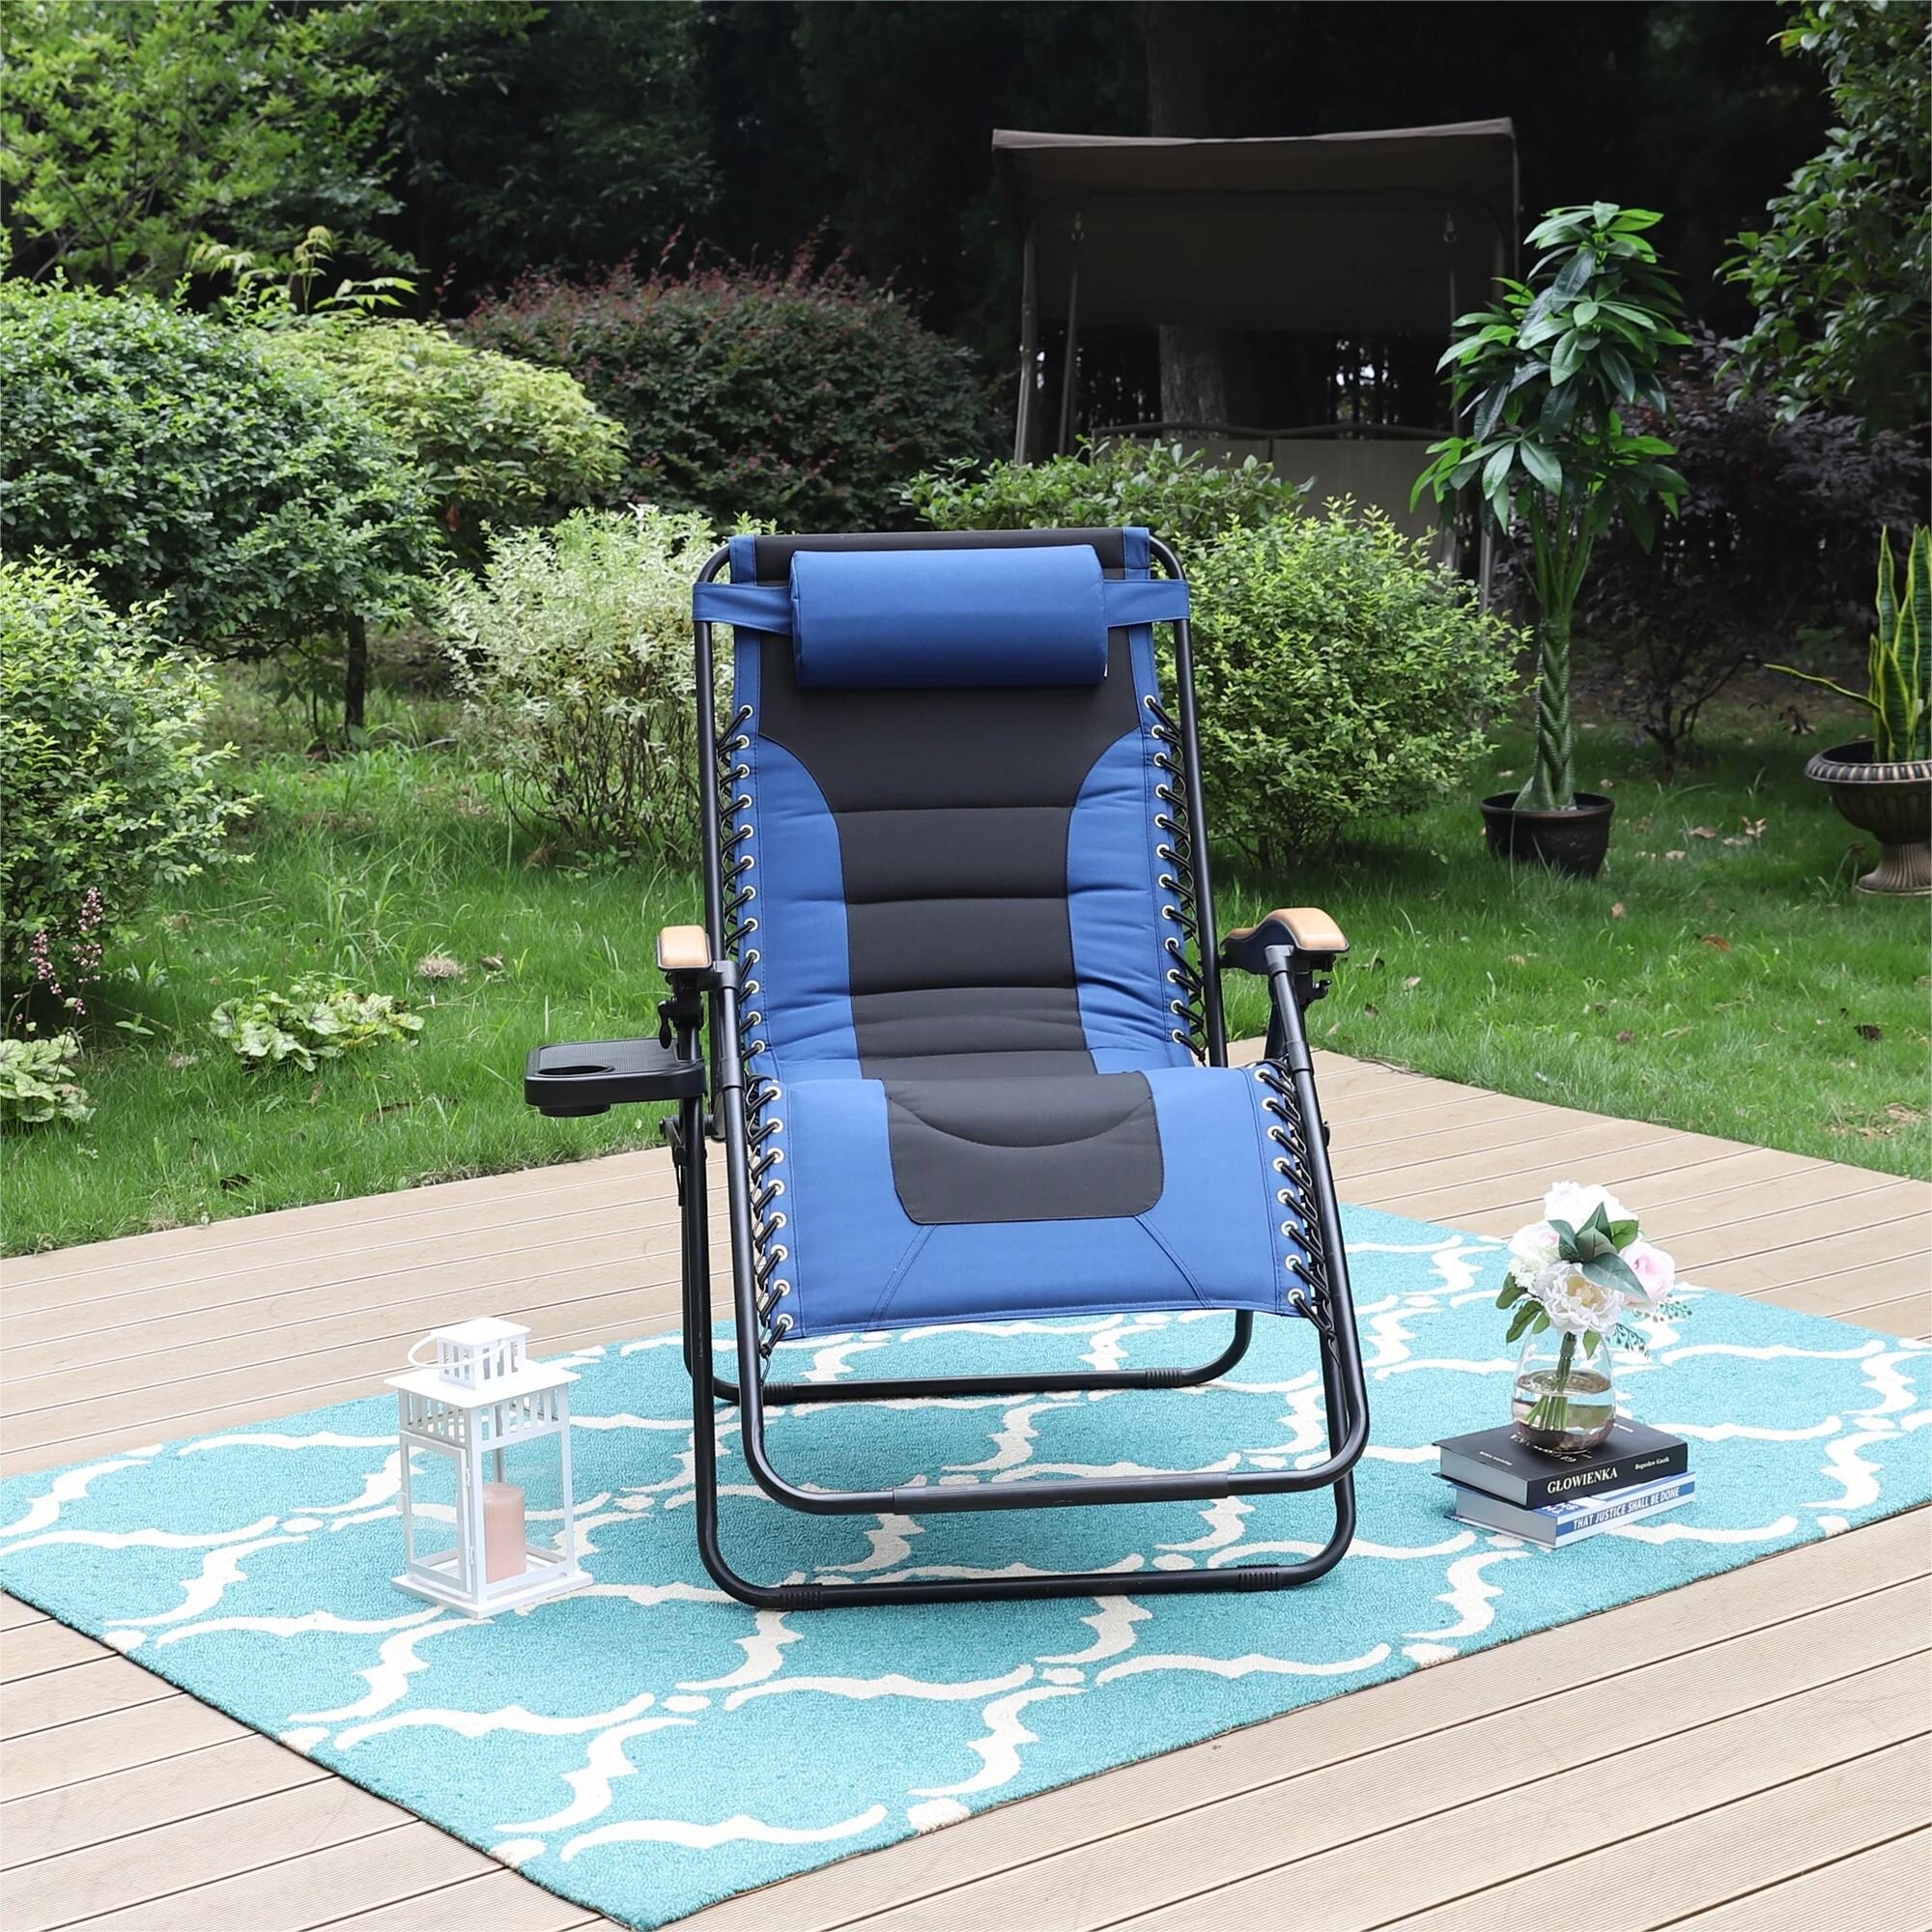 Oversized Padded Zero Gravity Chair Adjustable Camping Lawn Chair With Cup Holder